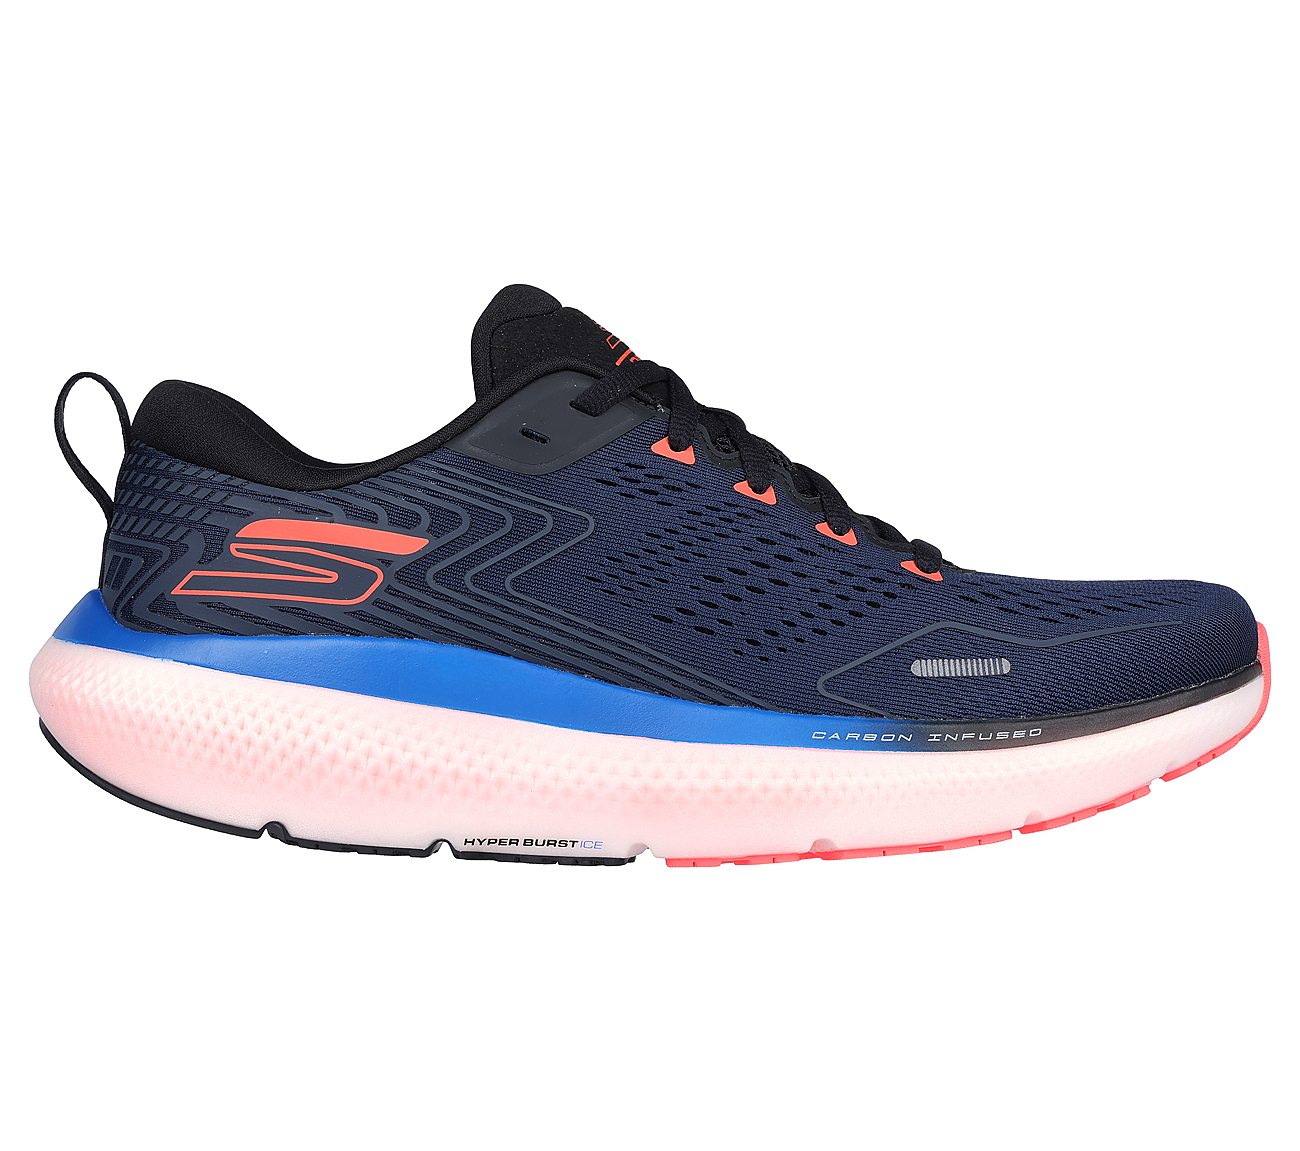 GO RUN RIDE 11, NAVY Footwear Lateral View